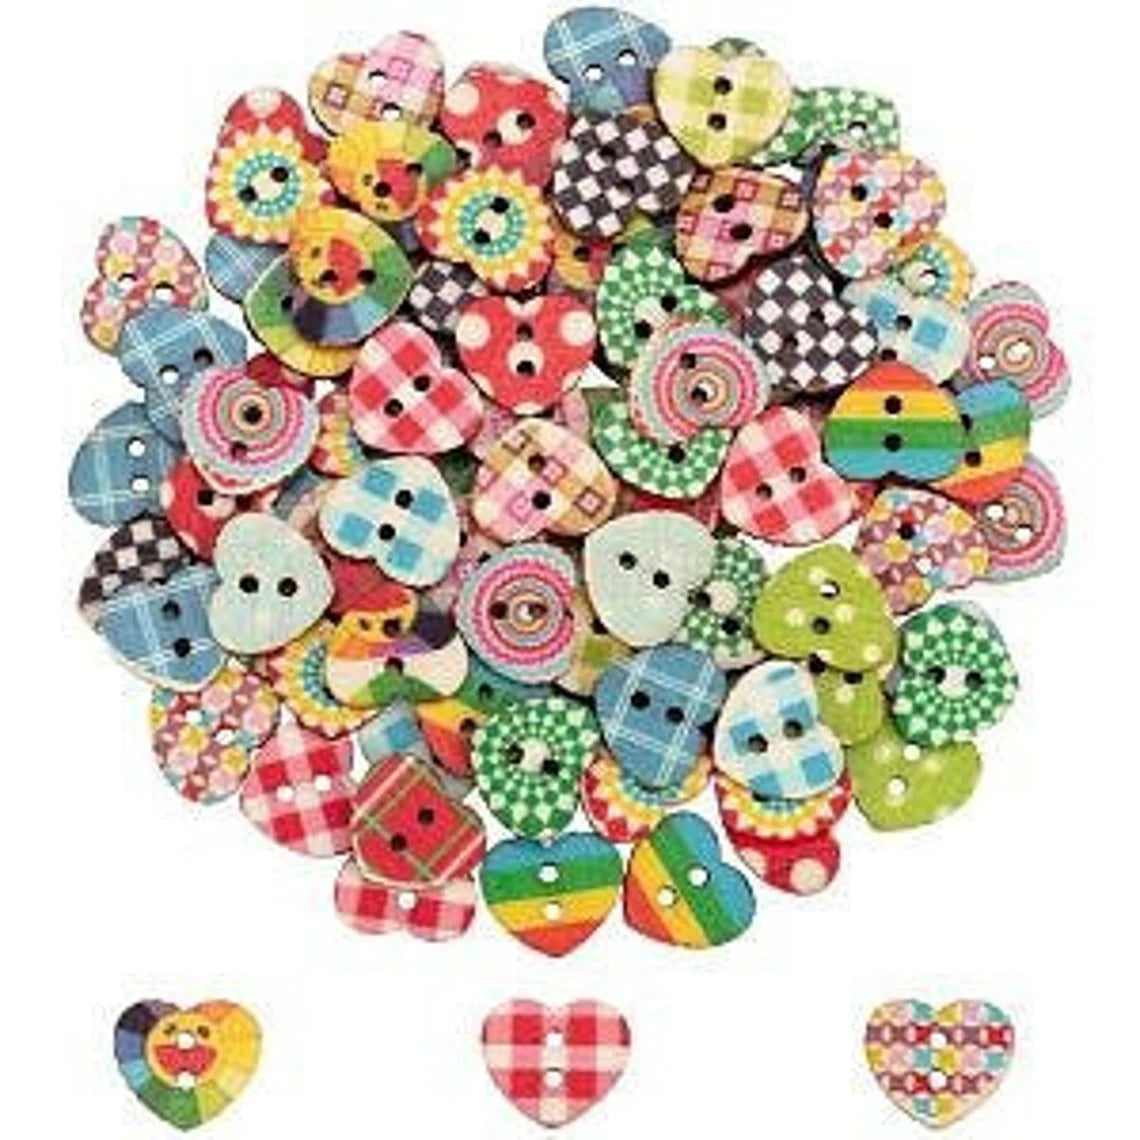 Small Printed Hearts Wooden Buttons - Set of 10